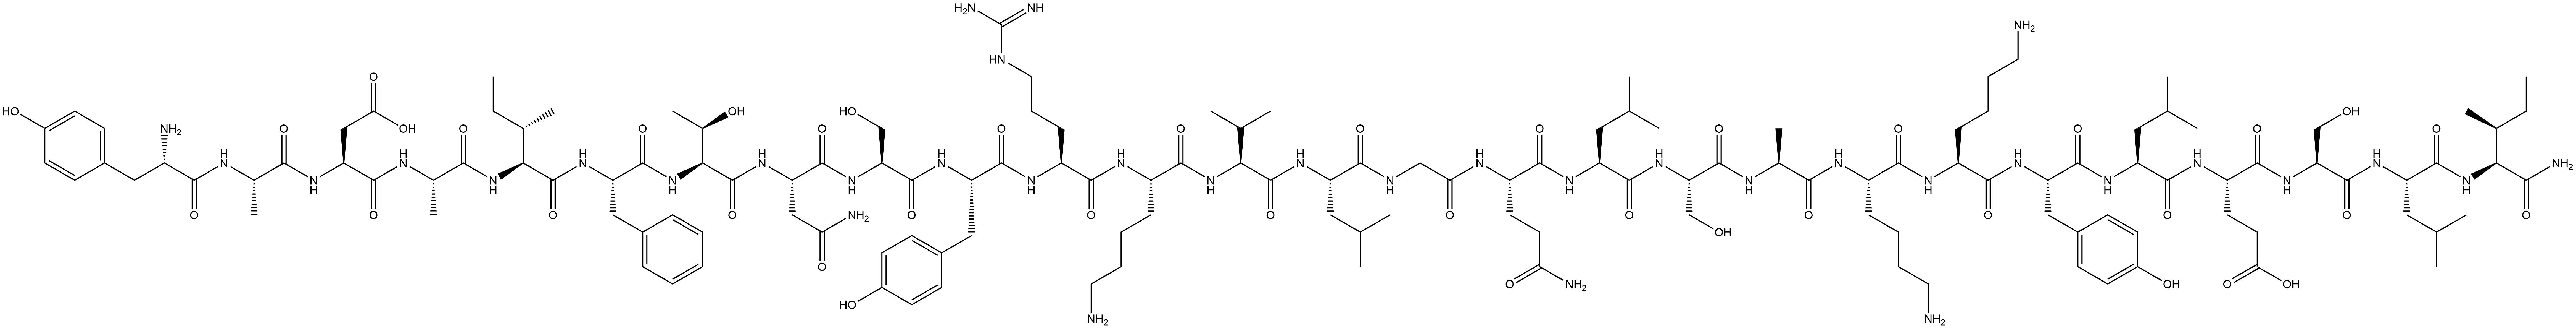 GRF-PHI heptacosapeptide amide Structure